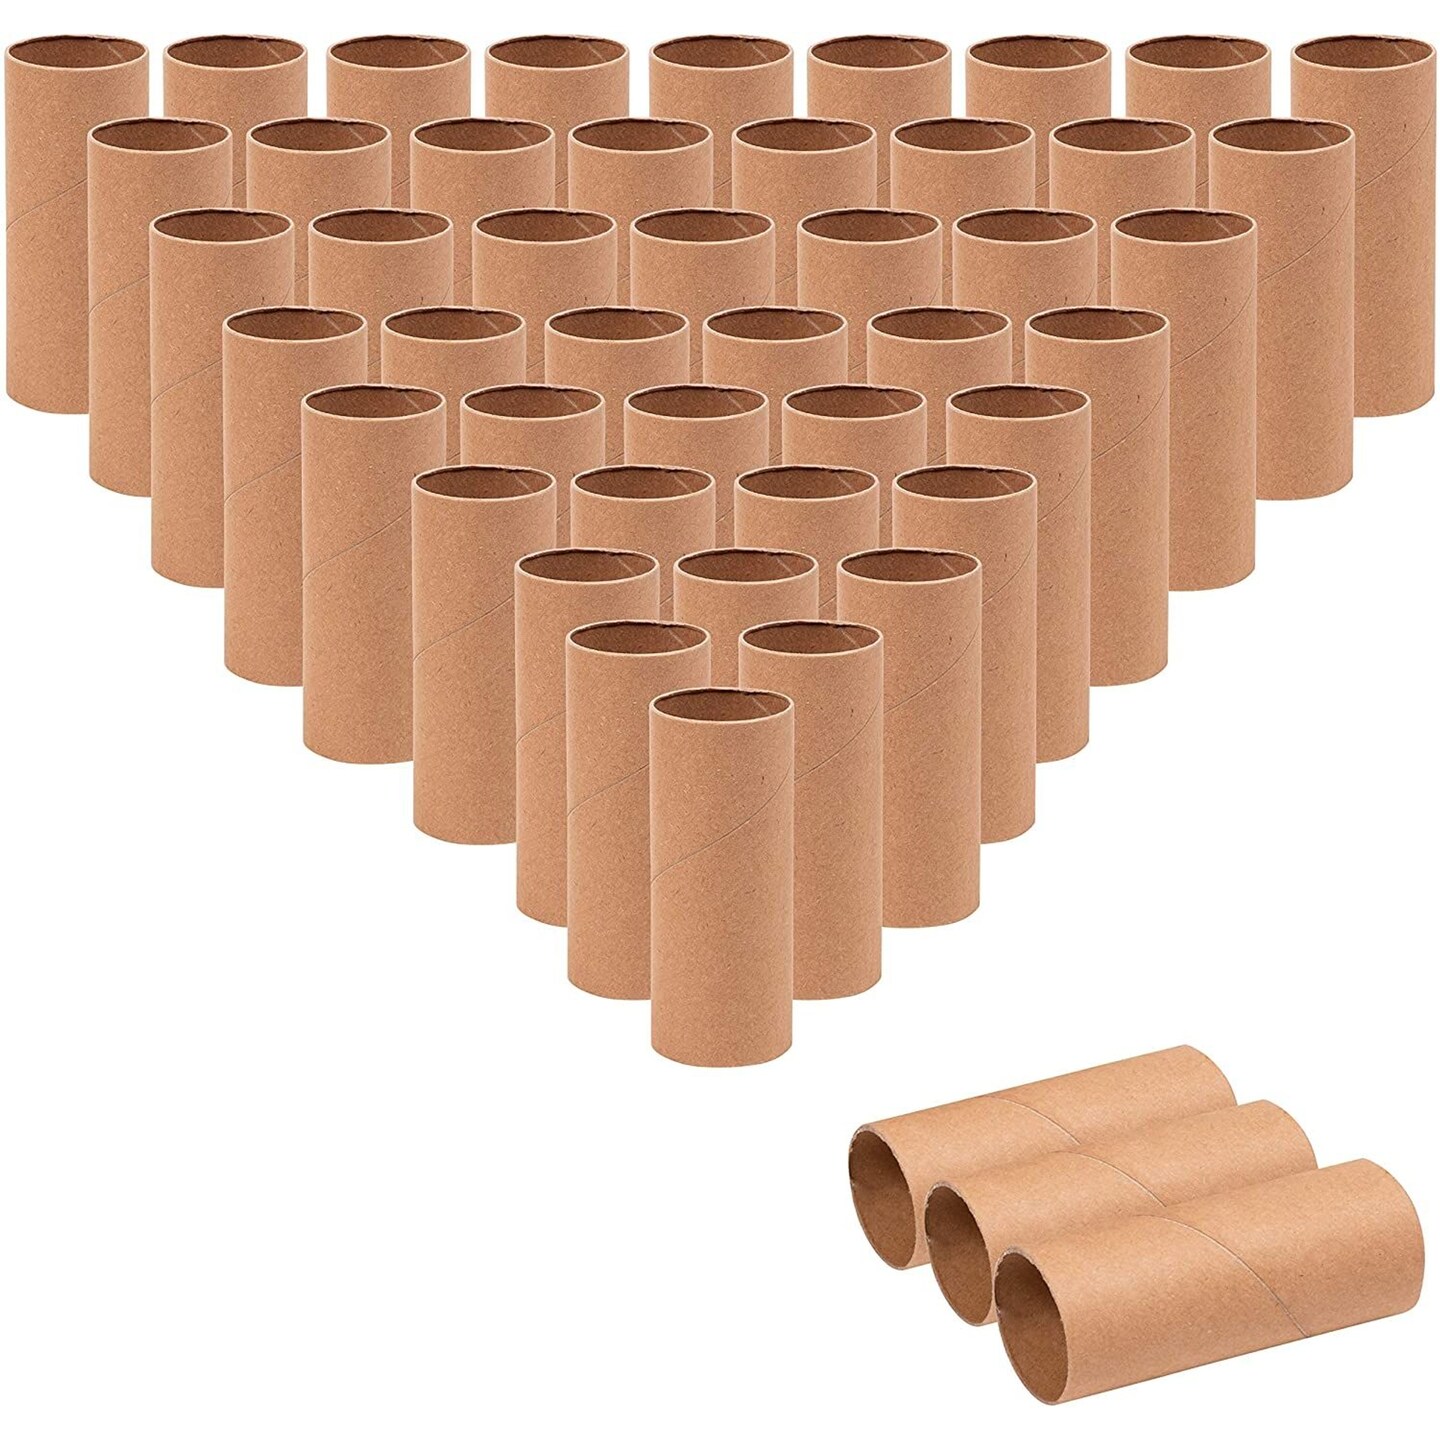 KYMY 48 Pack Brown Cardboard Tubes for Crafts, DIY Crafting Cardboard Paper Cylinder Tubes, Thick and Premium Cardboard Craft Thick Empty Toilet